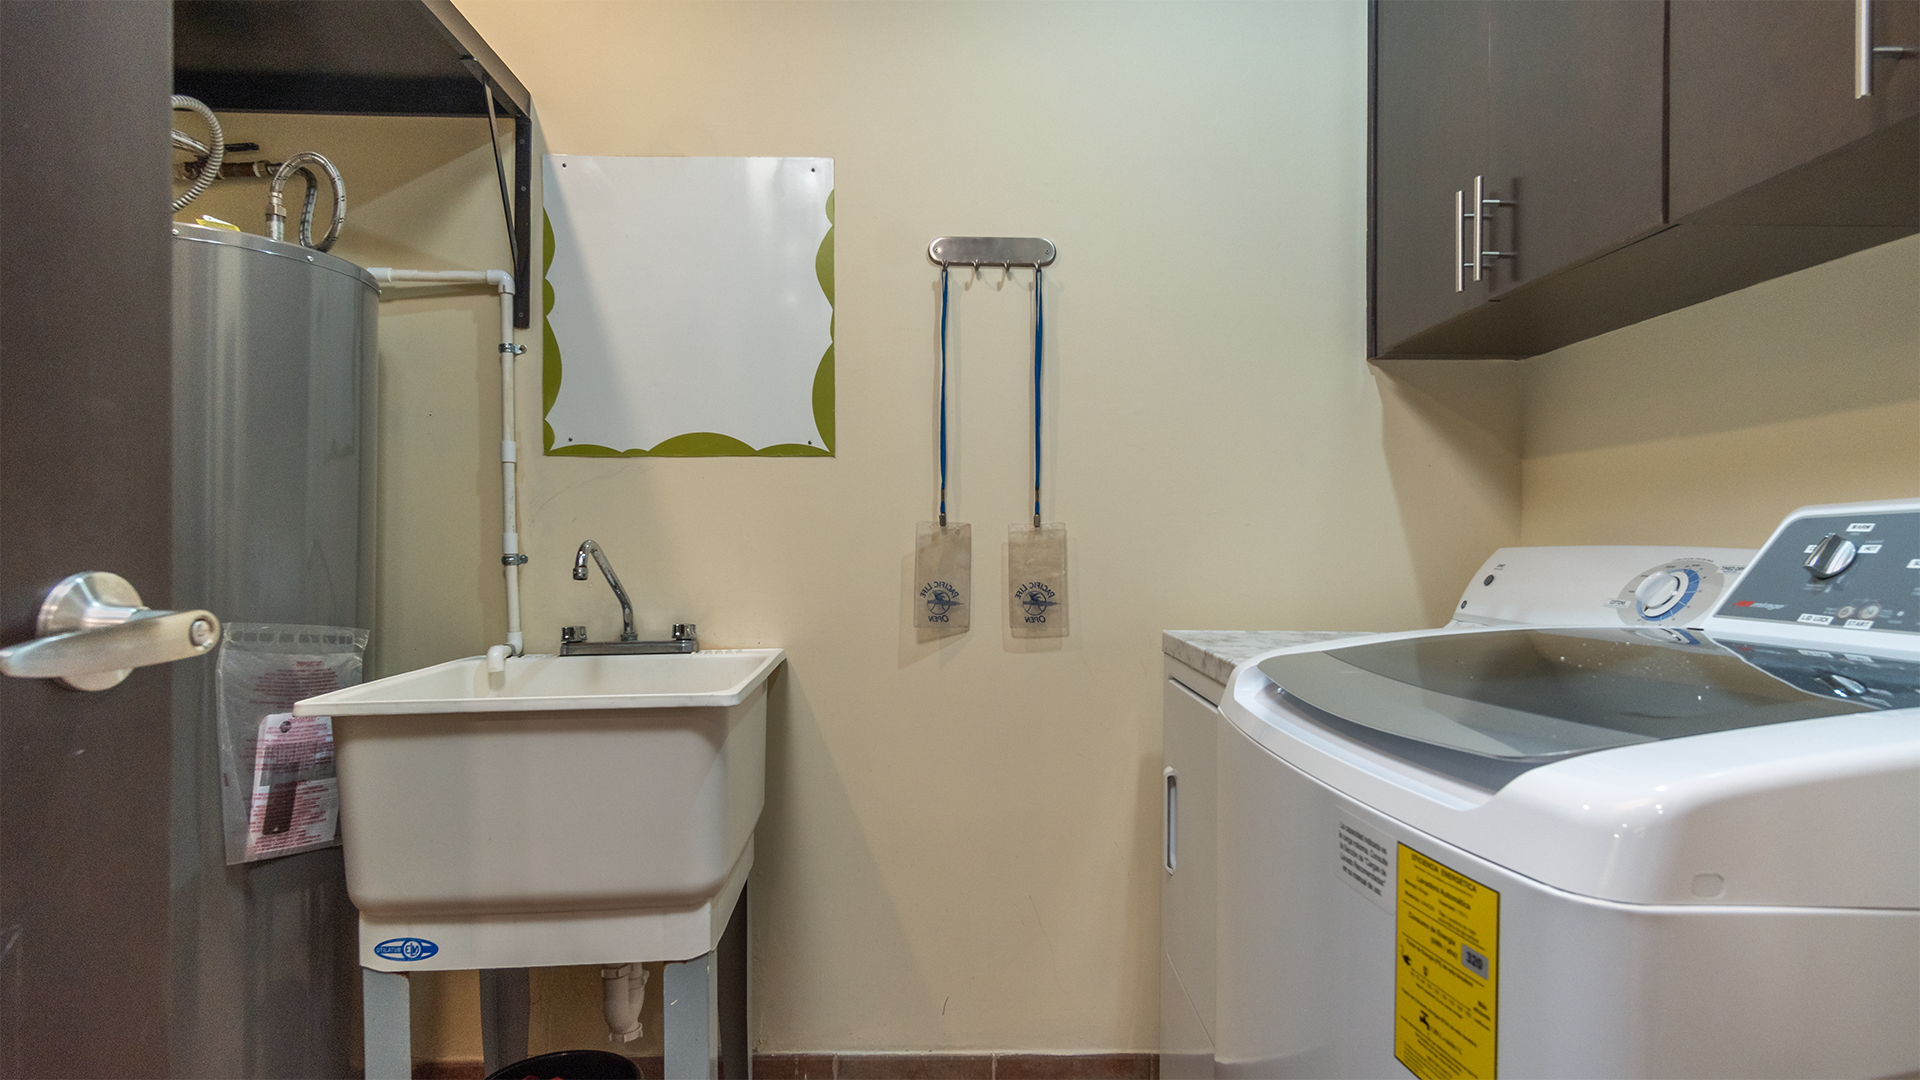 just off of the kitchen is the laundry room with sink, washer, and dryer